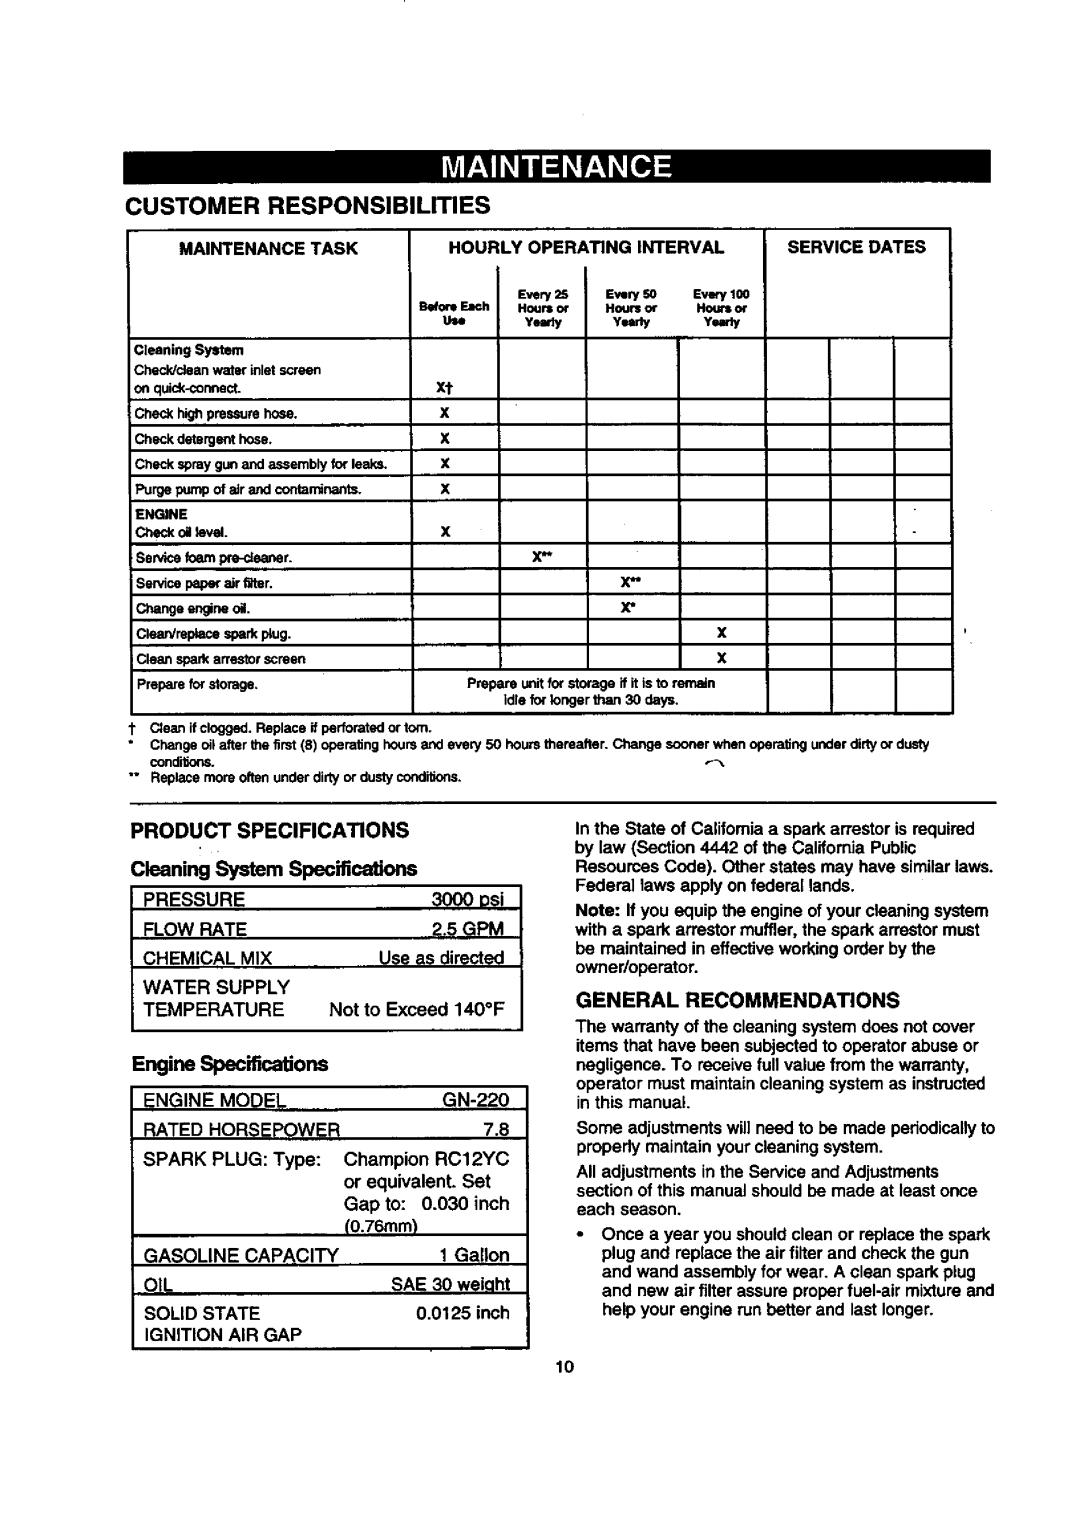 Sears 580.768050 manual Customer Responsibilities, Cleaning System Specifications, General Recommendations 